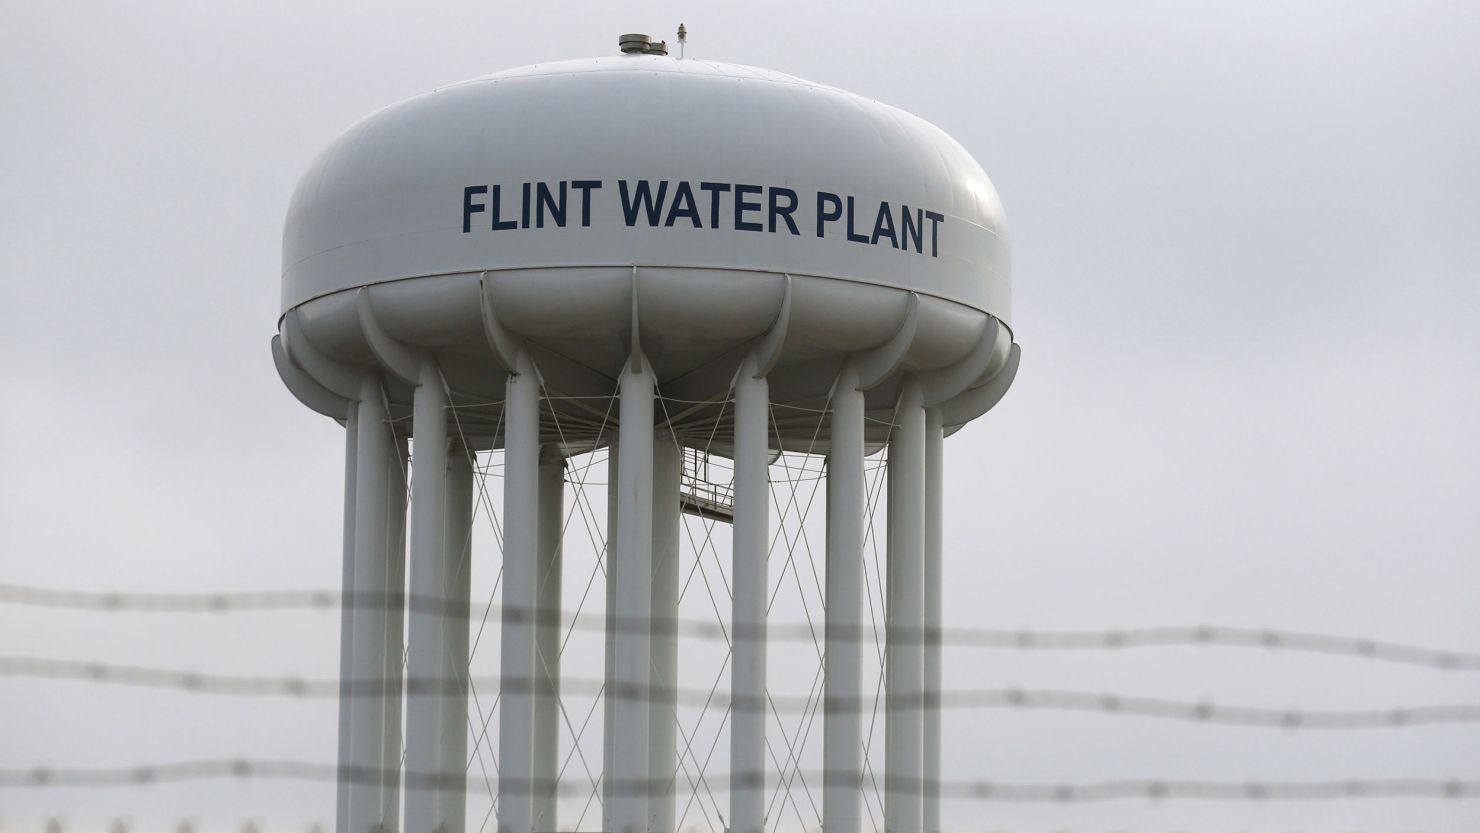 The top of the Flint Water Plant tower is seen in 2016 in Michigan.